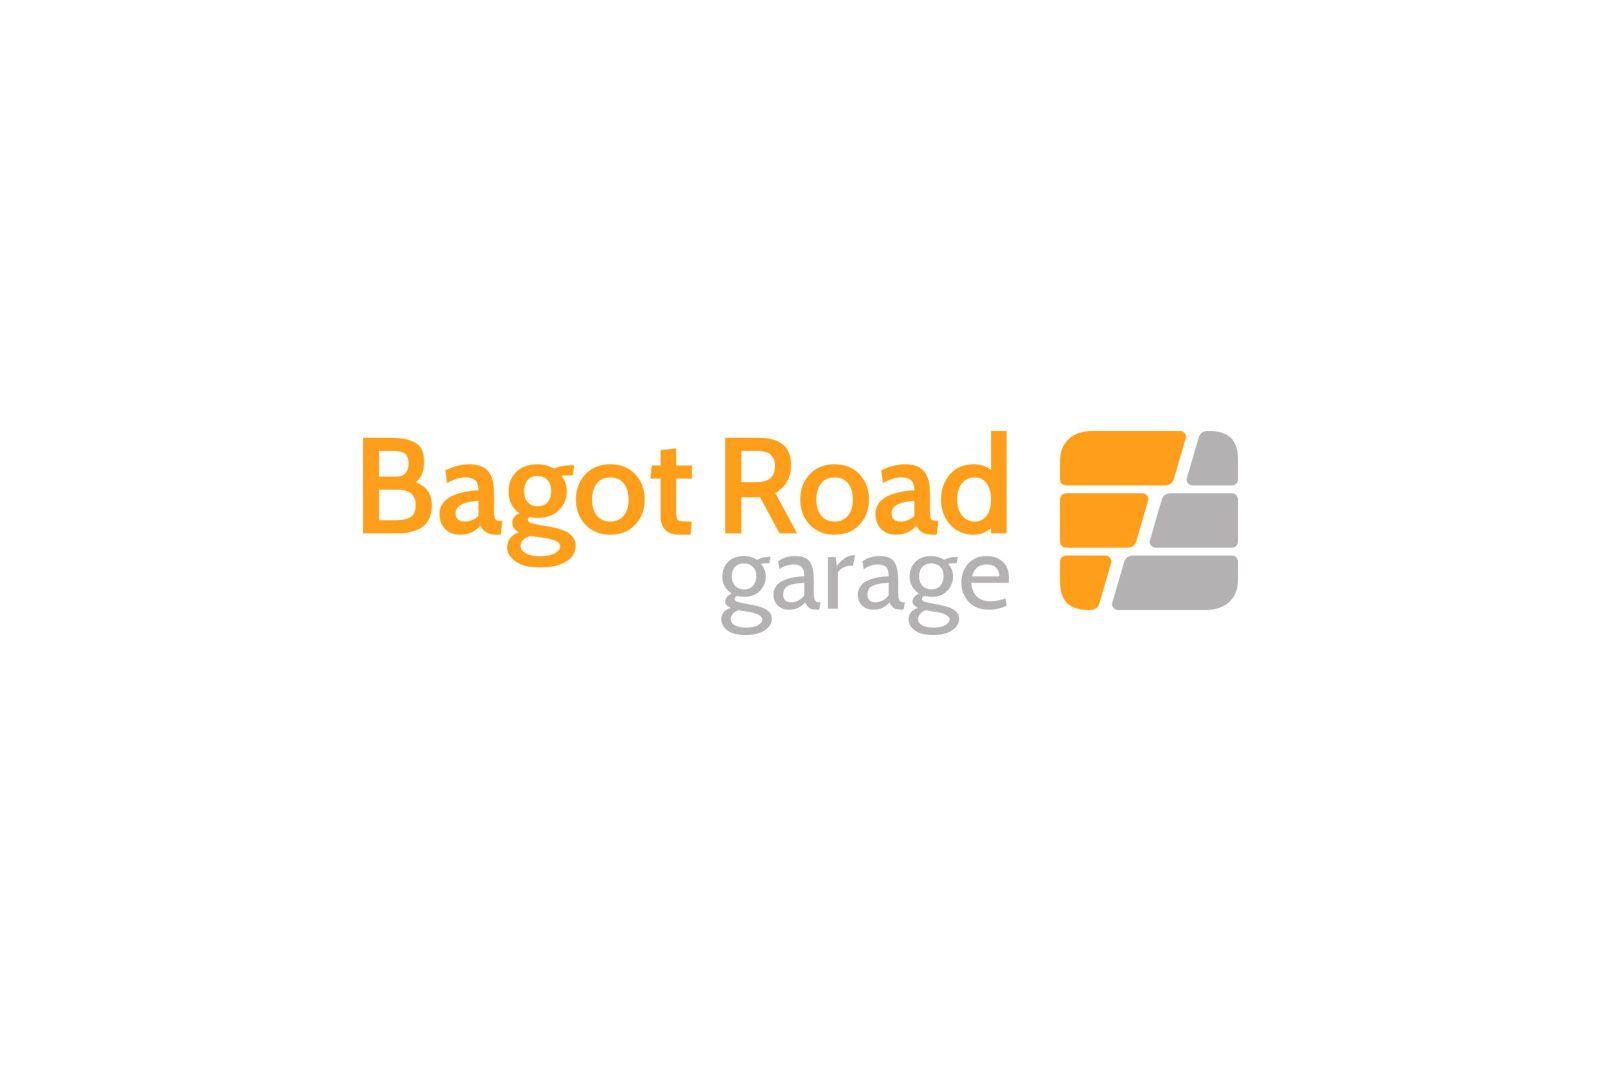 Well Known Road Logo - Bagot Road Garage - Forge Agency